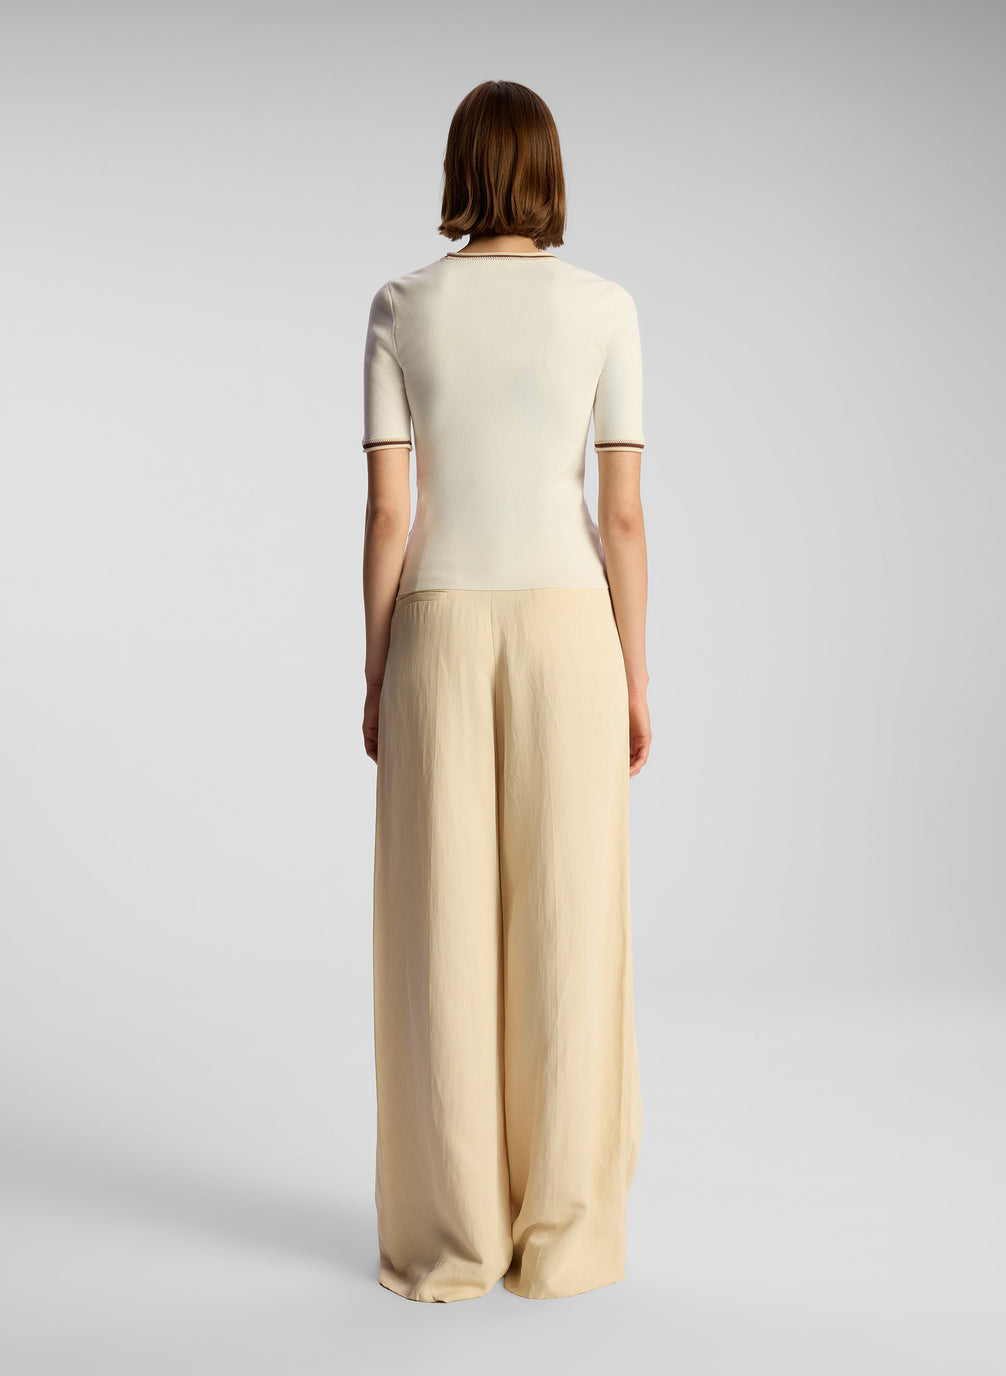 back  view of woman wearing white top and beige pants